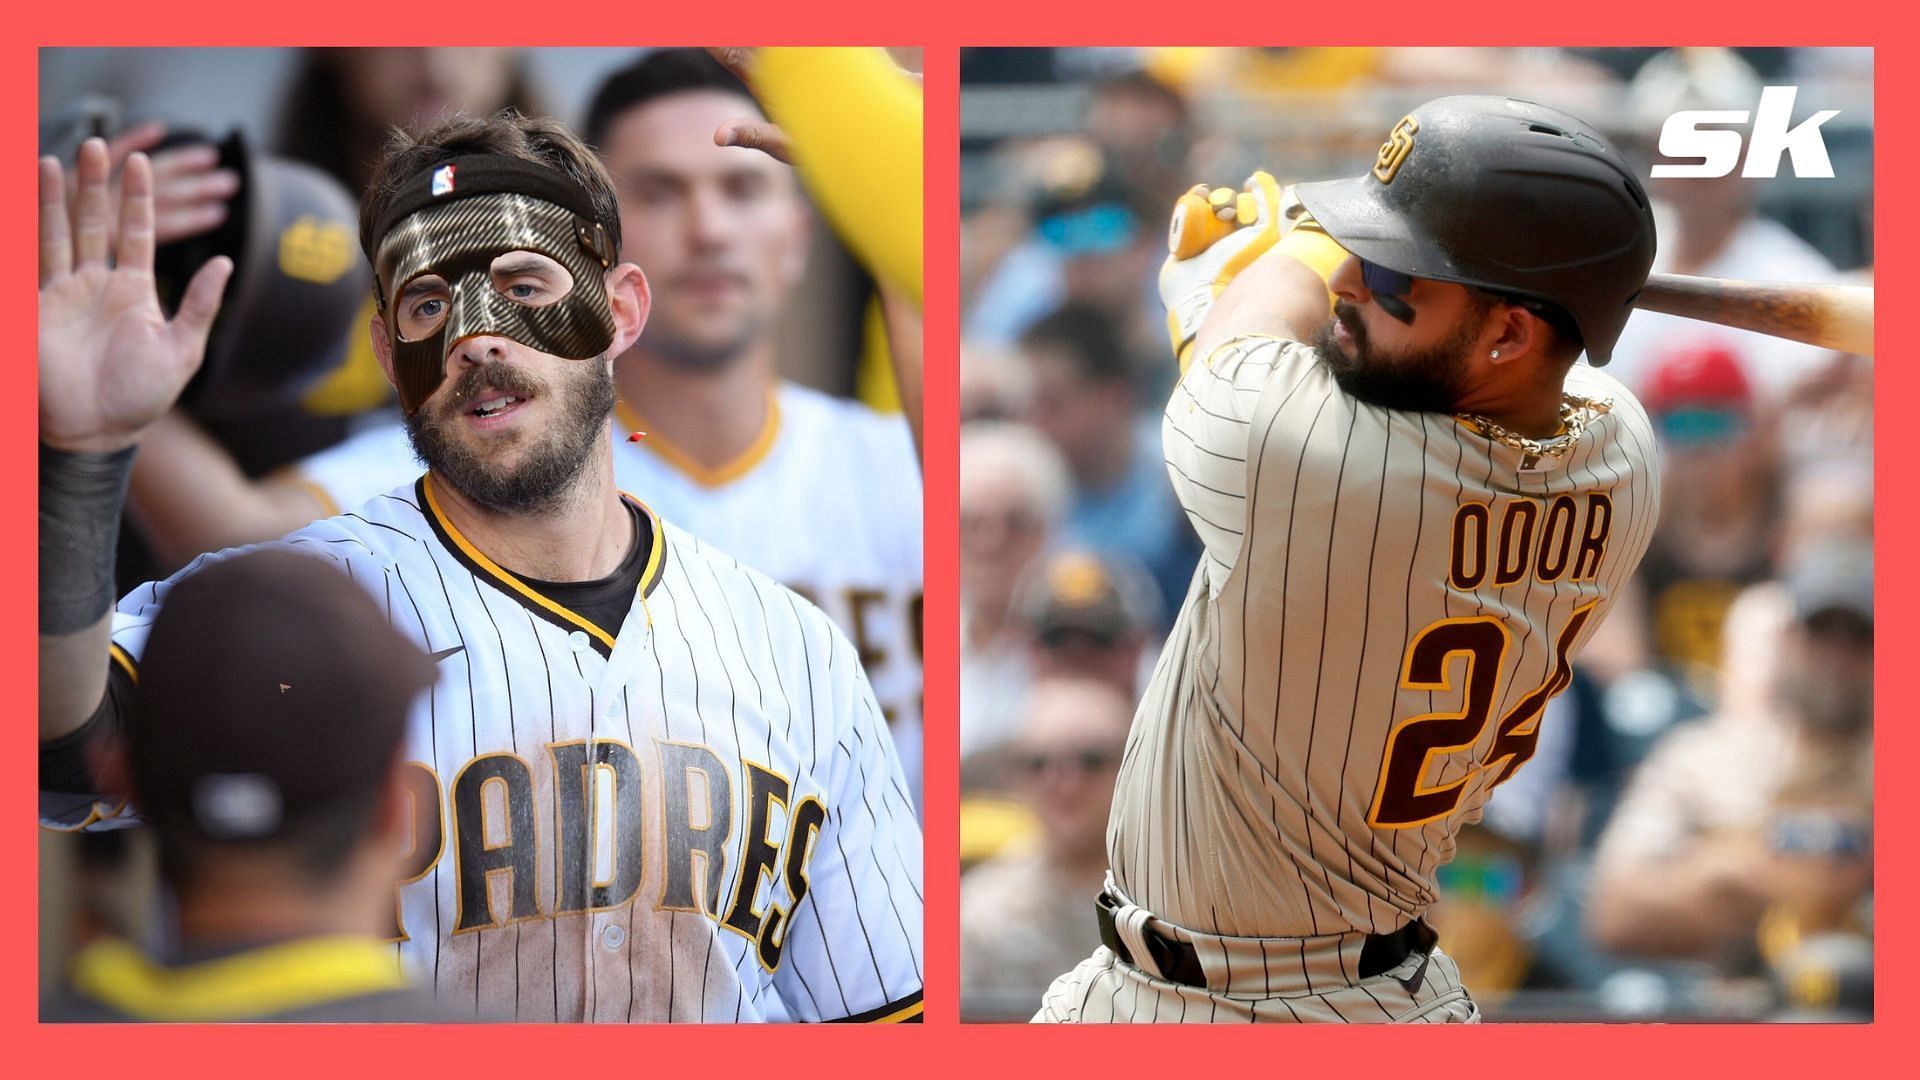 Padres Odor Nola: What happened to Rougned Odor and Austin Nola